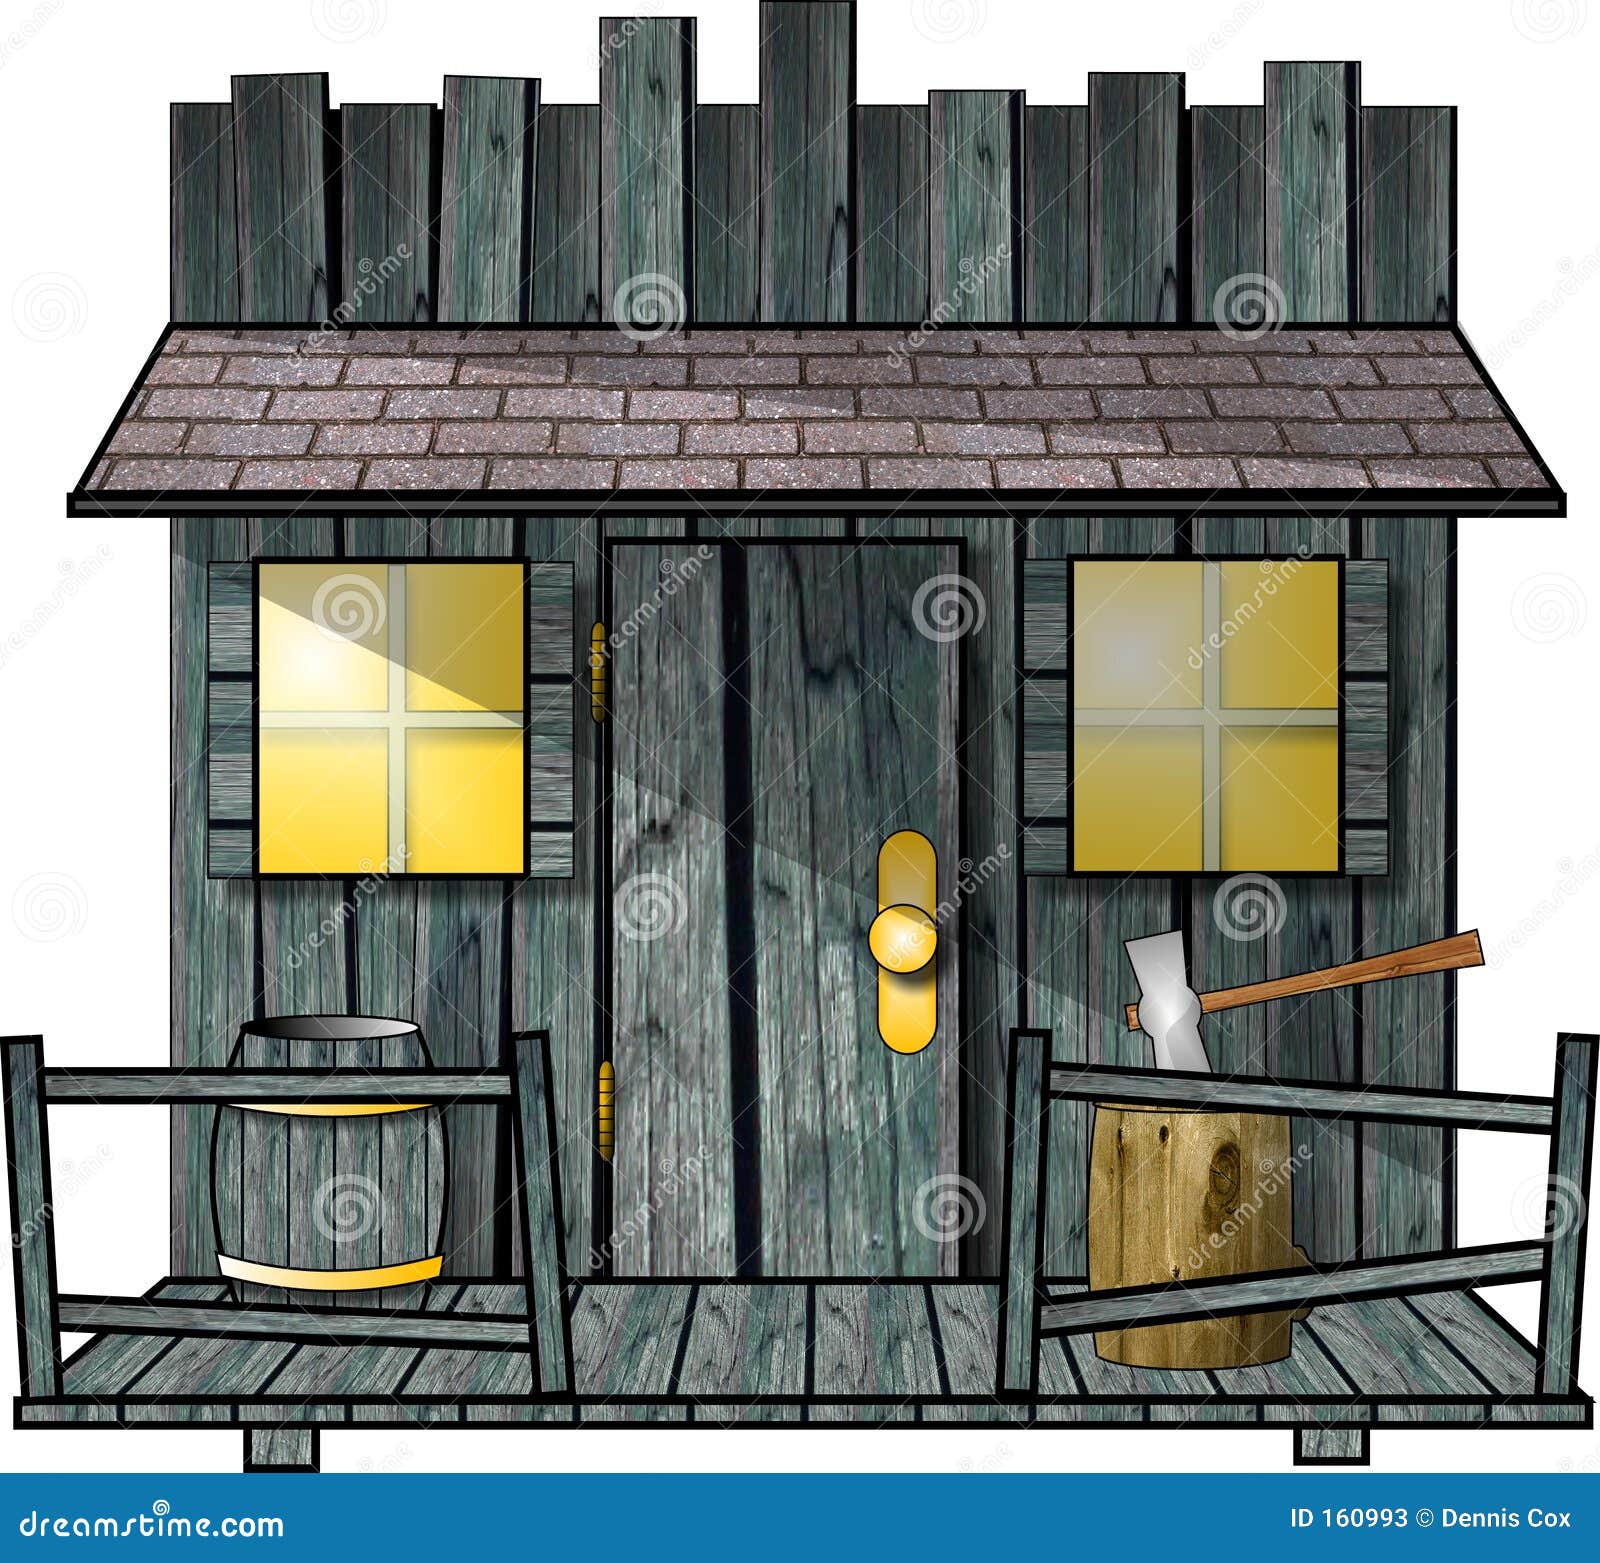 This illustration that I created depicts an old weathered shed.